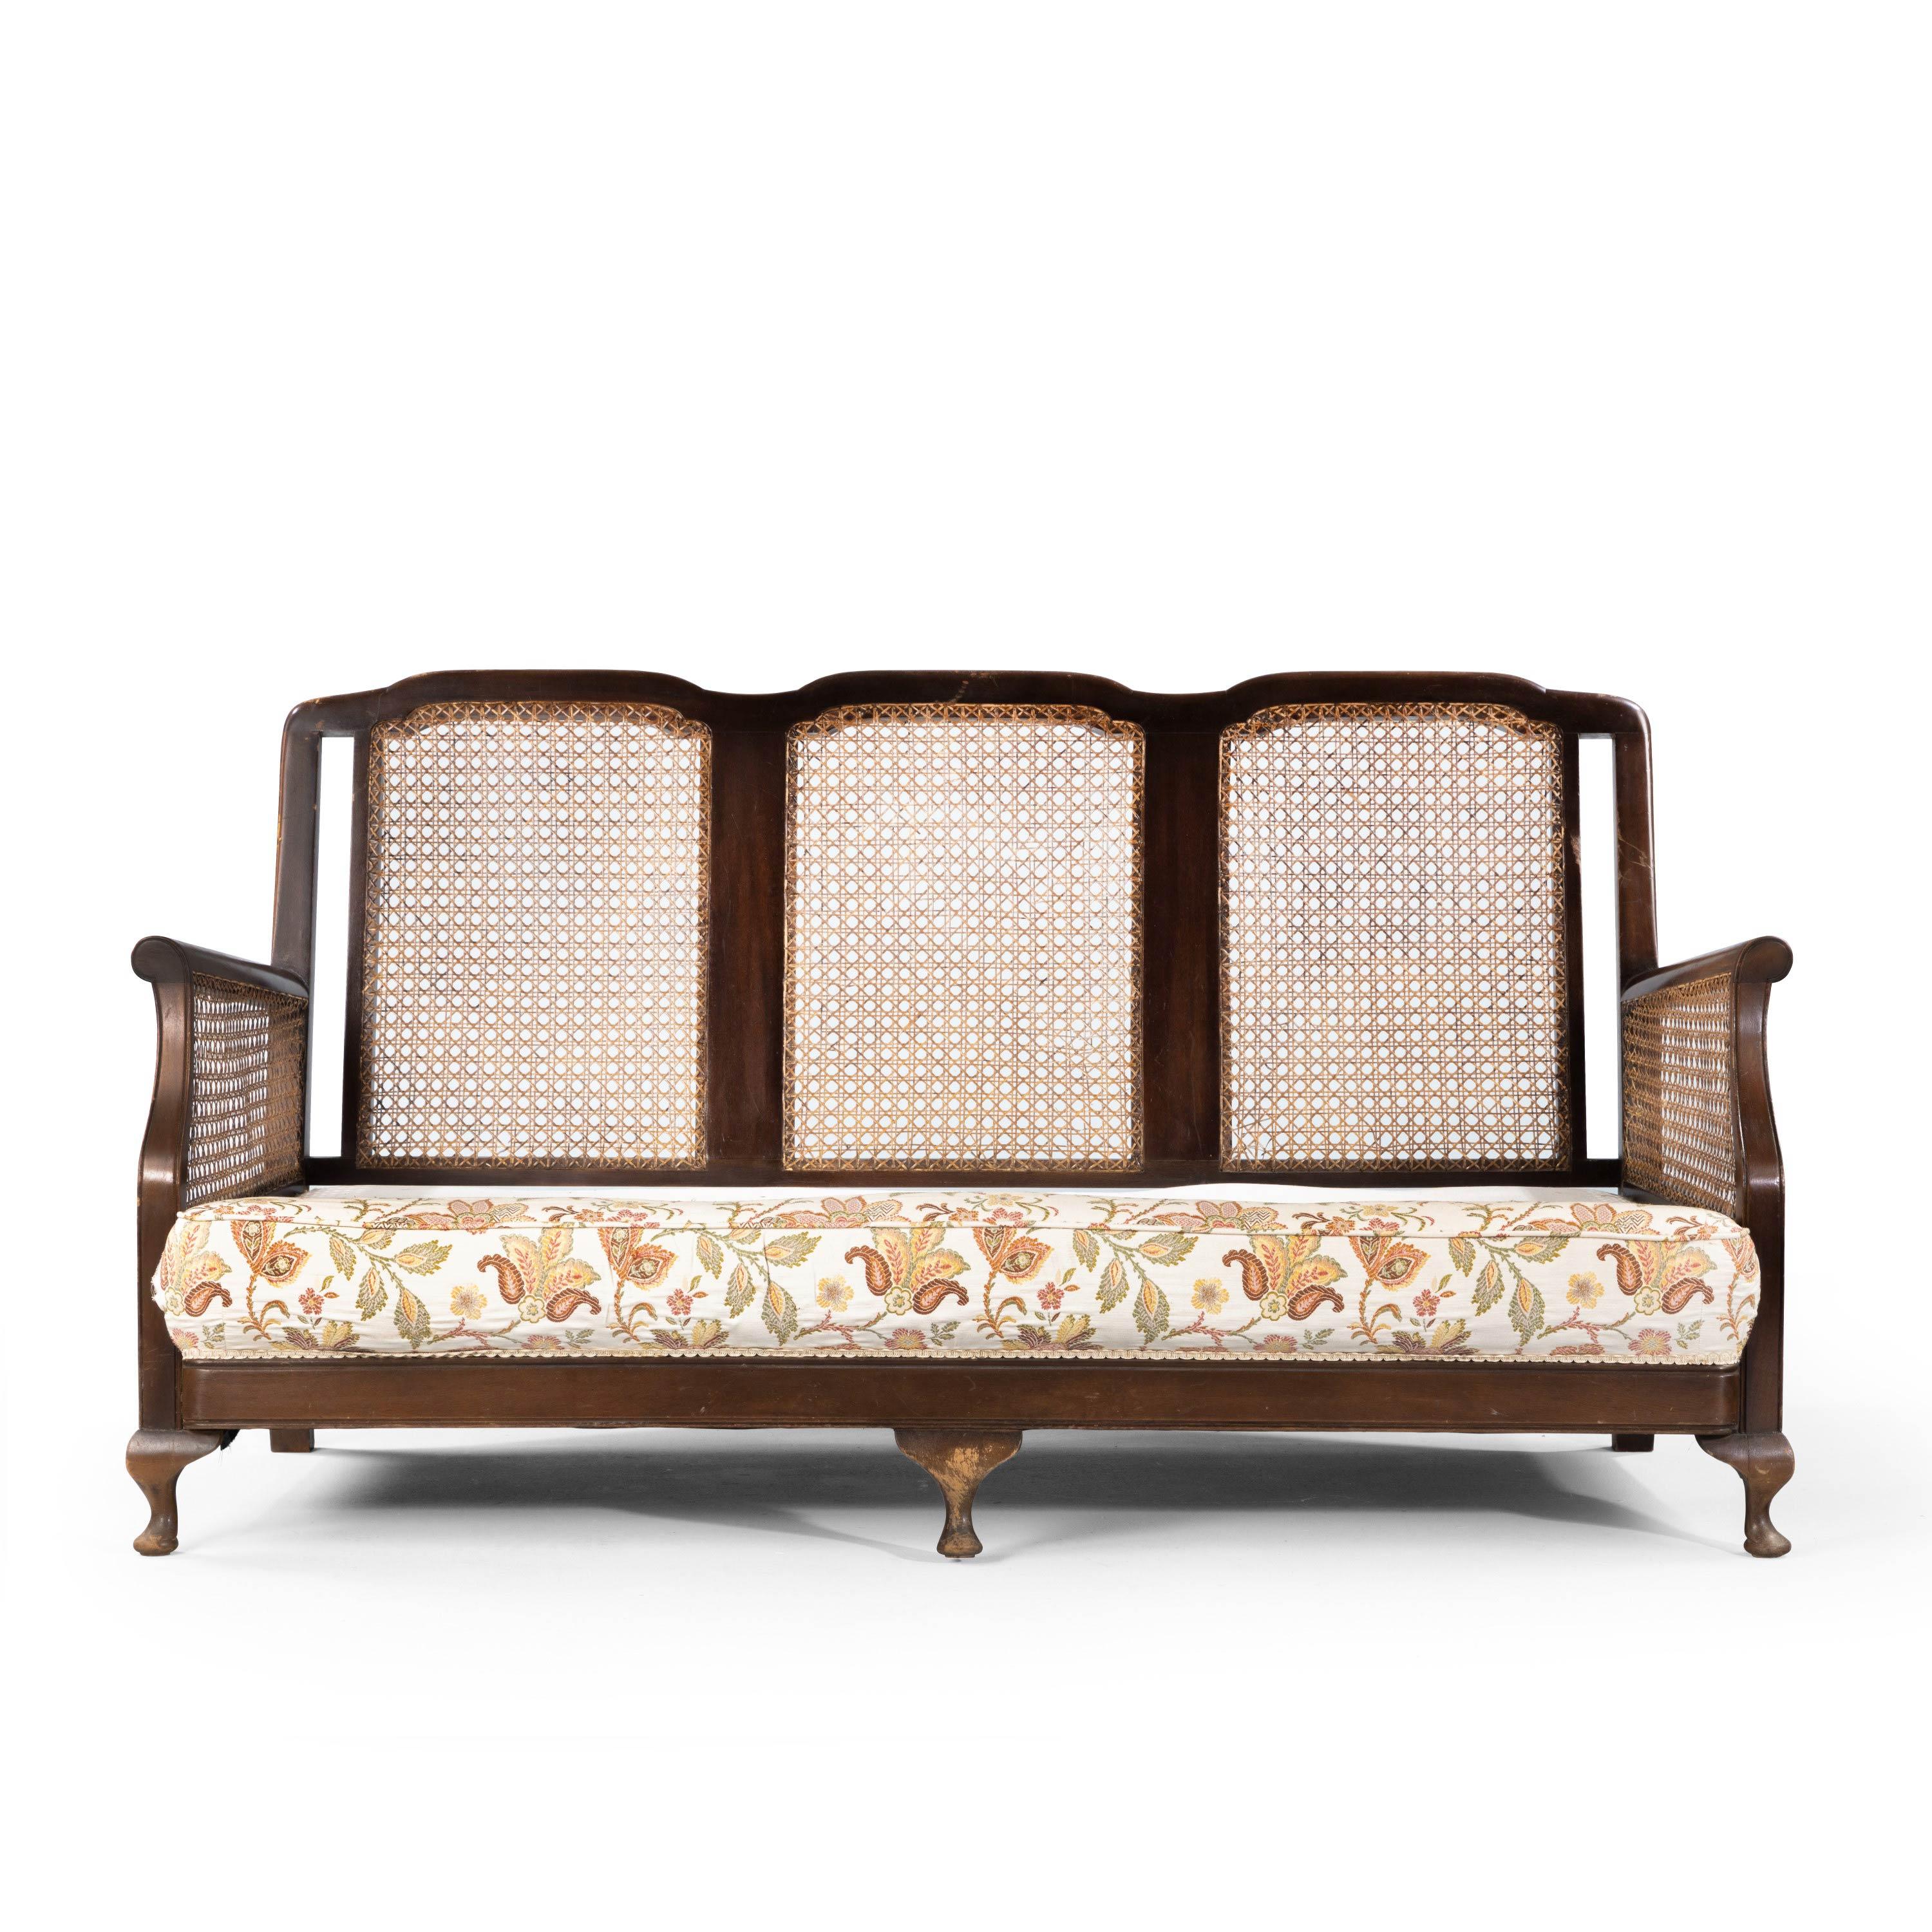 An attractive bergère three pillar sofa in a mahogany and canework frame. The canework in excellent overall condition. The sofa was recovered in 2017 and in a top quality linen fabric and has not been used since.
Measures: Seat height 23